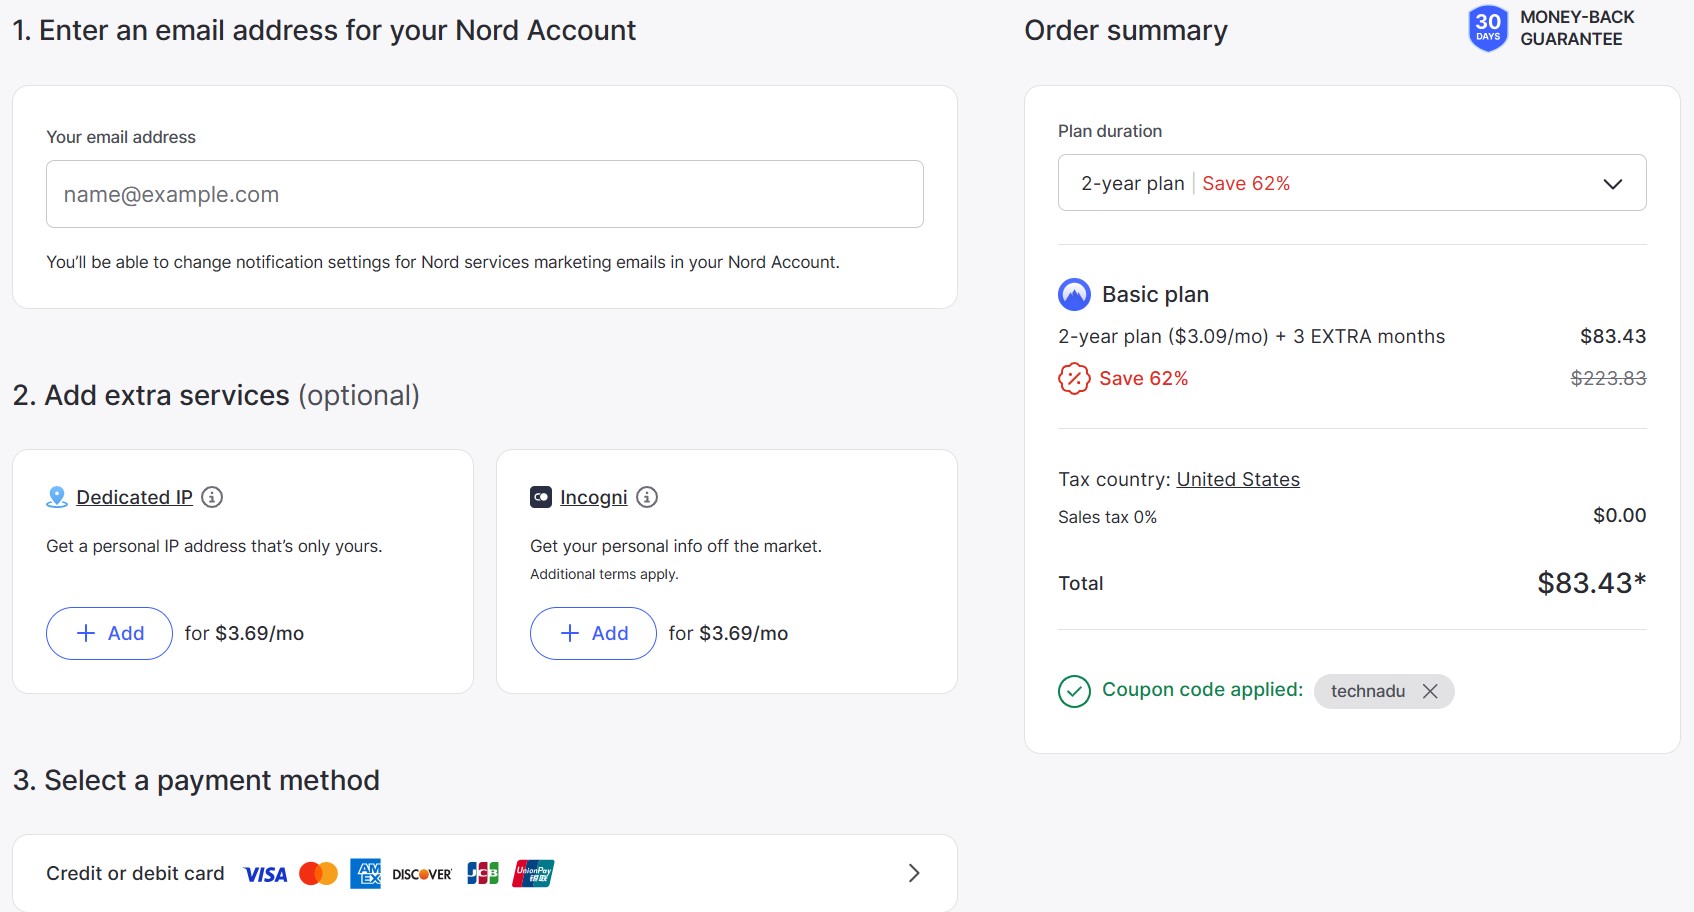 Finalizing the sign up for NordVPN